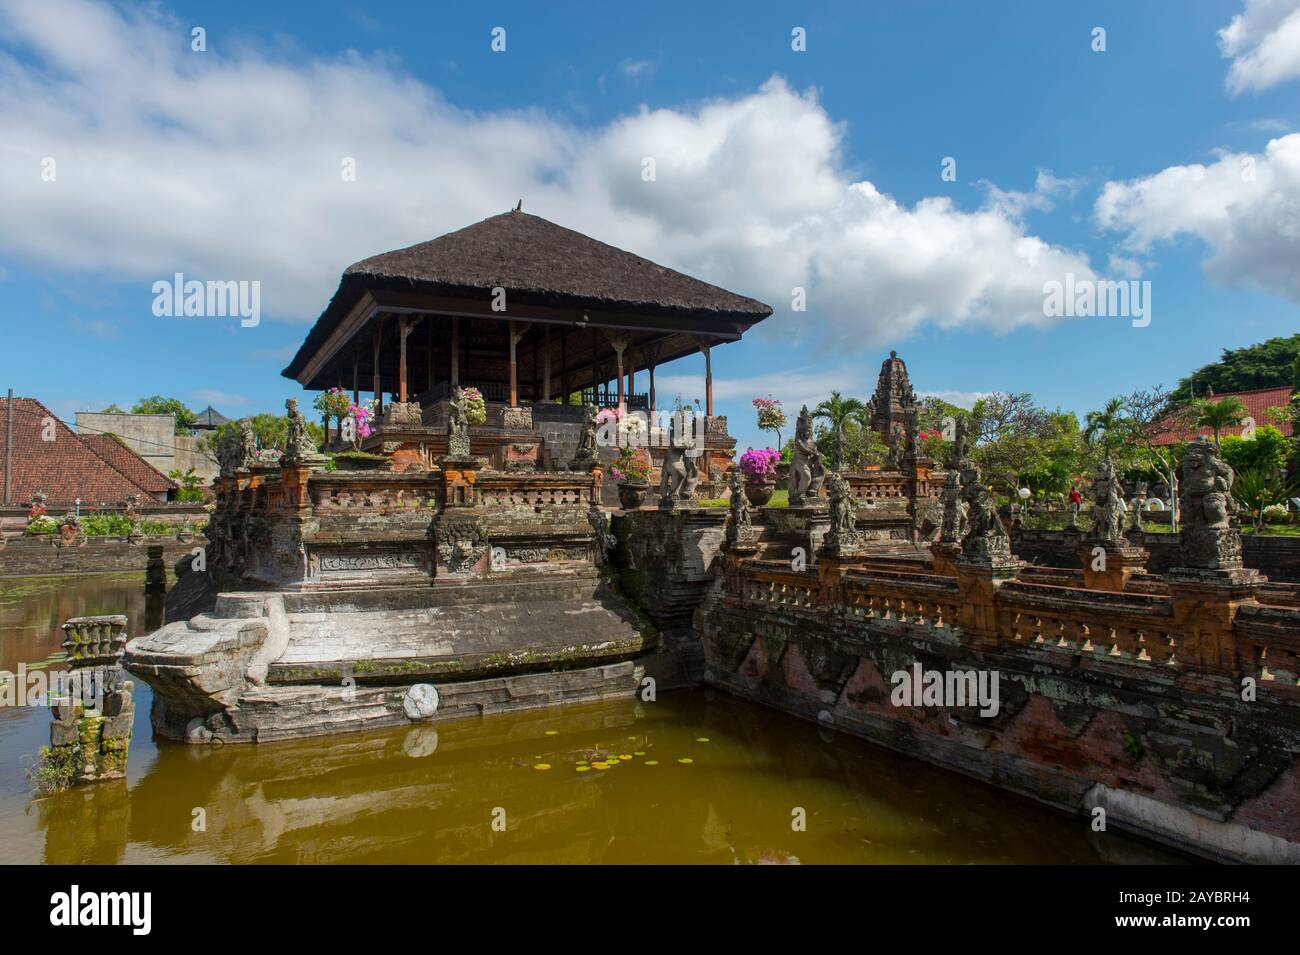 View of the Kertha Gosa pavilion (former Hall of Justice), in Puri Semarapura Palace, Klungkung, Bali, Indonesia. Stock Photo